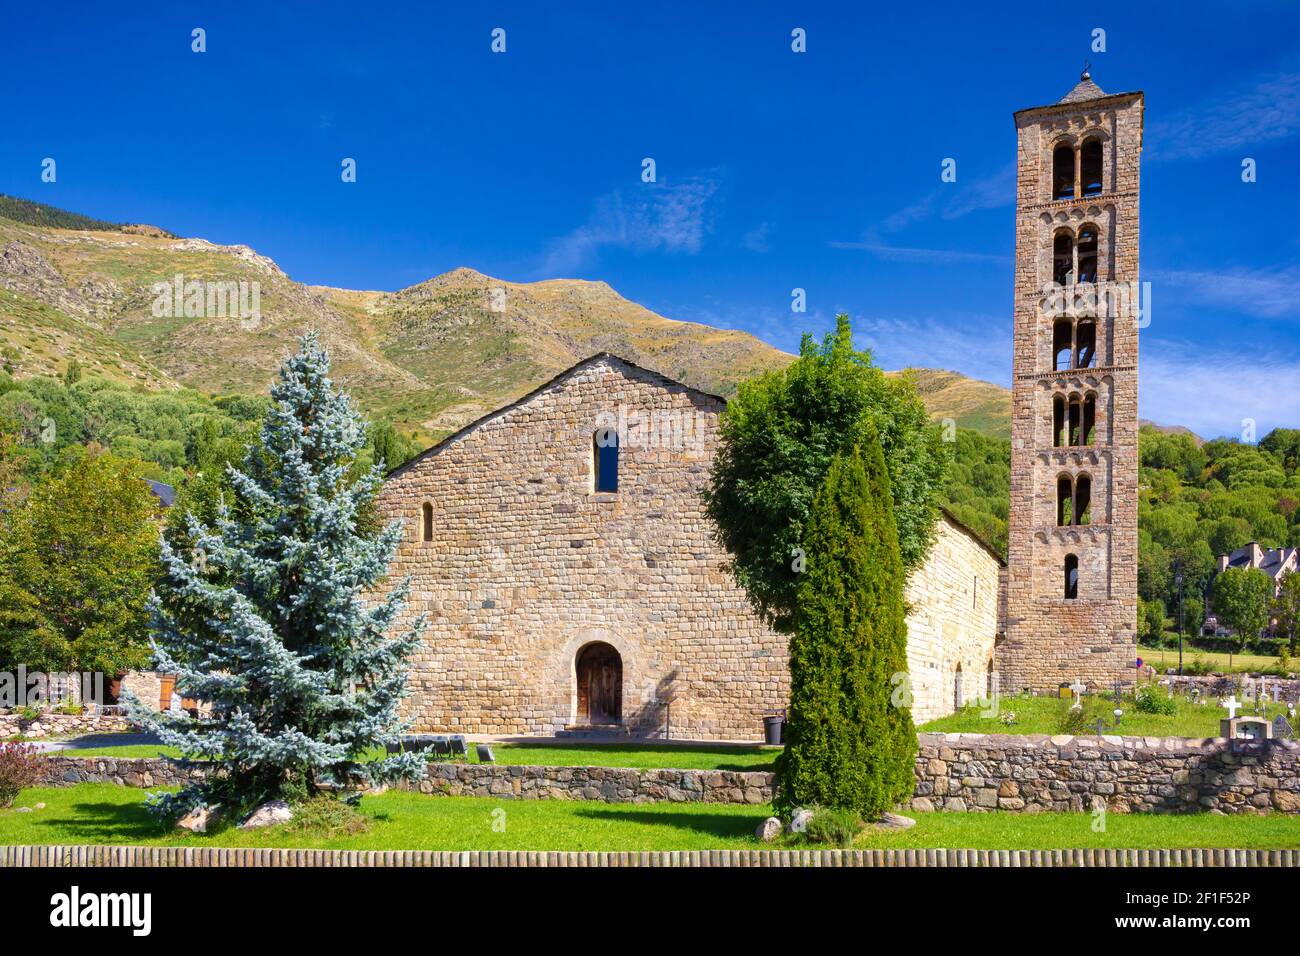 View of the main facade of the church of St. Climent in Taull, declared a UNESCO heritage site. Catalonia, Spain Stock Photo